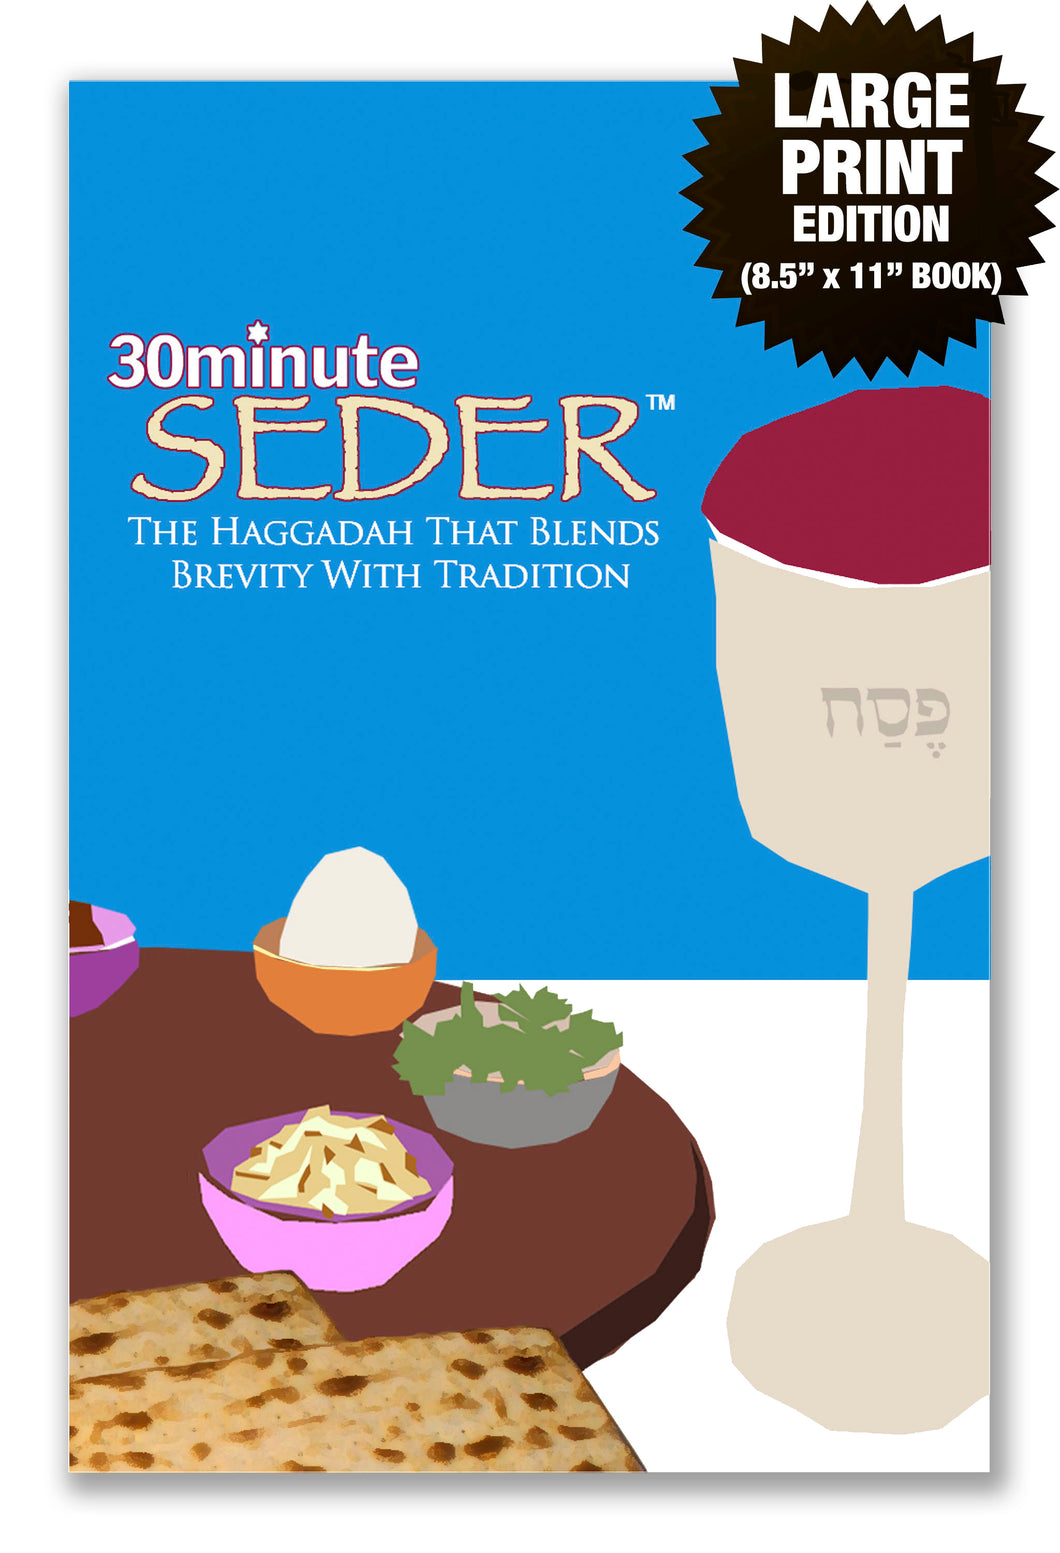 30minute-Seder Large print edition cover